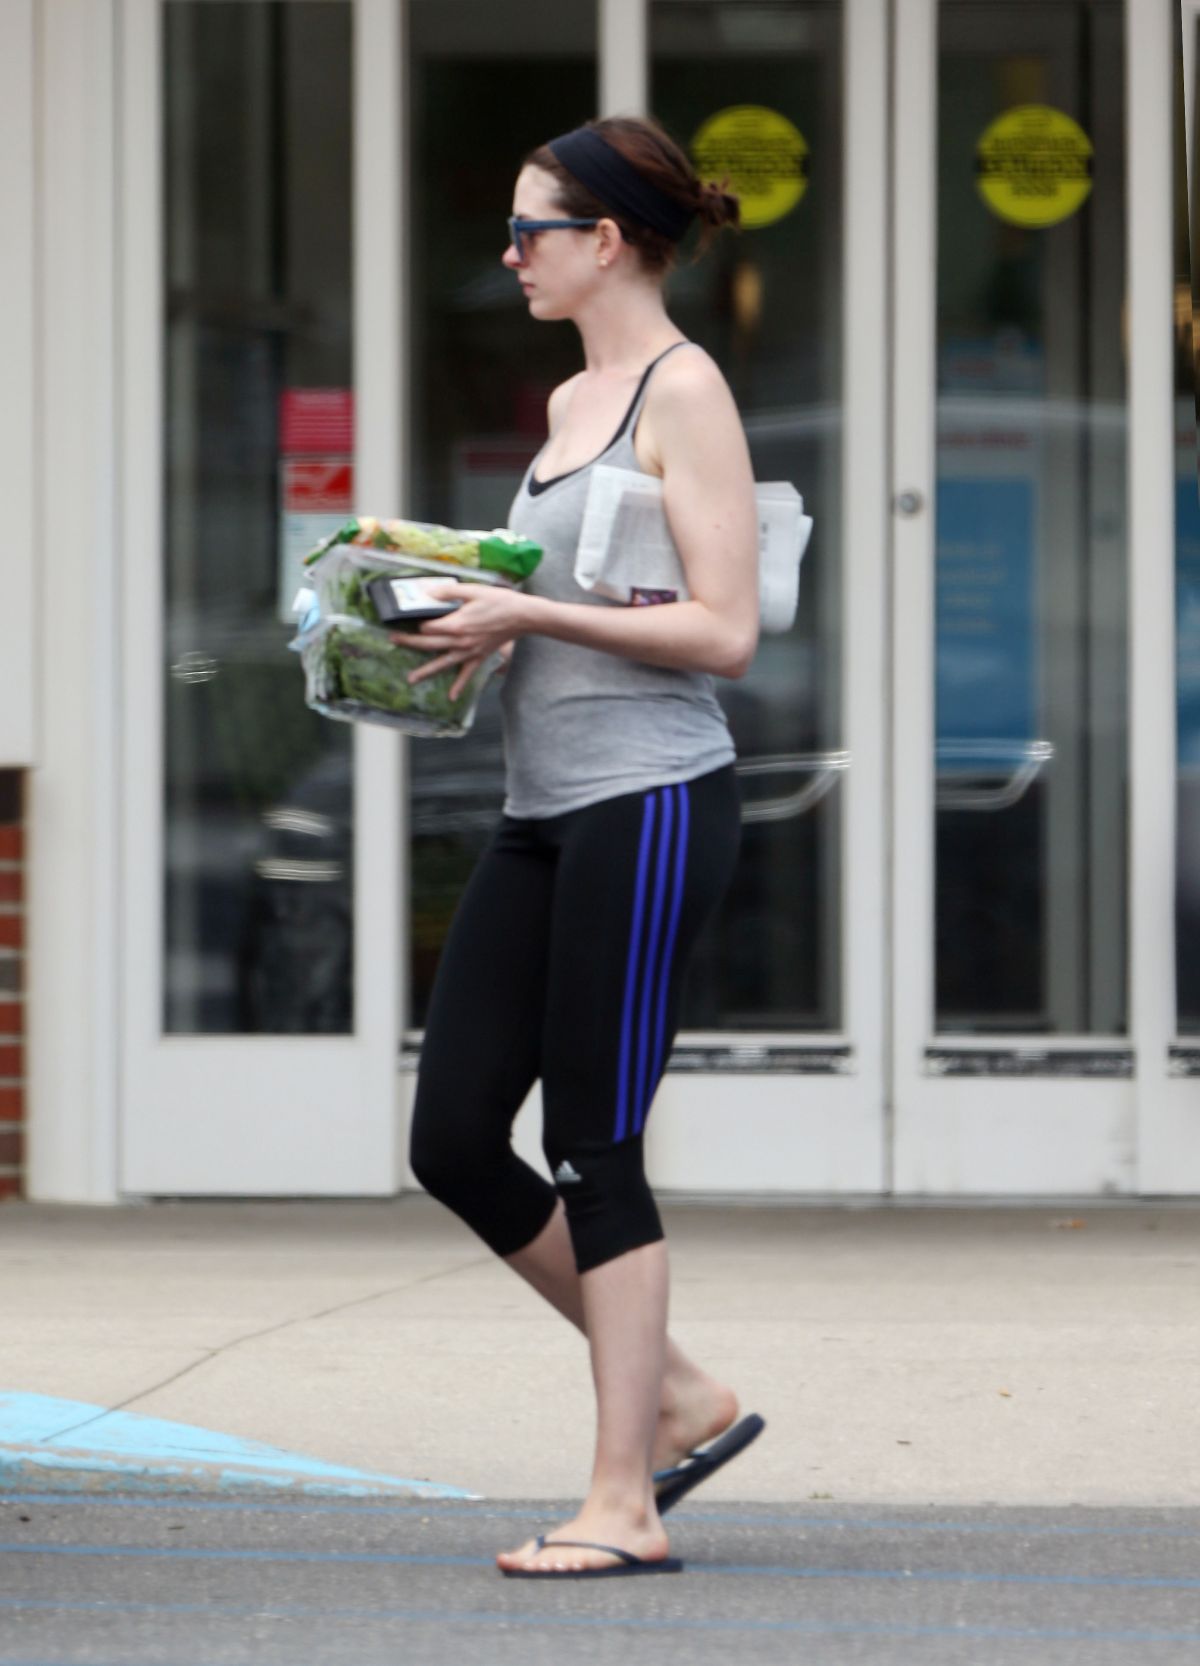 Can you believe this is Anne Hathaway? I can't